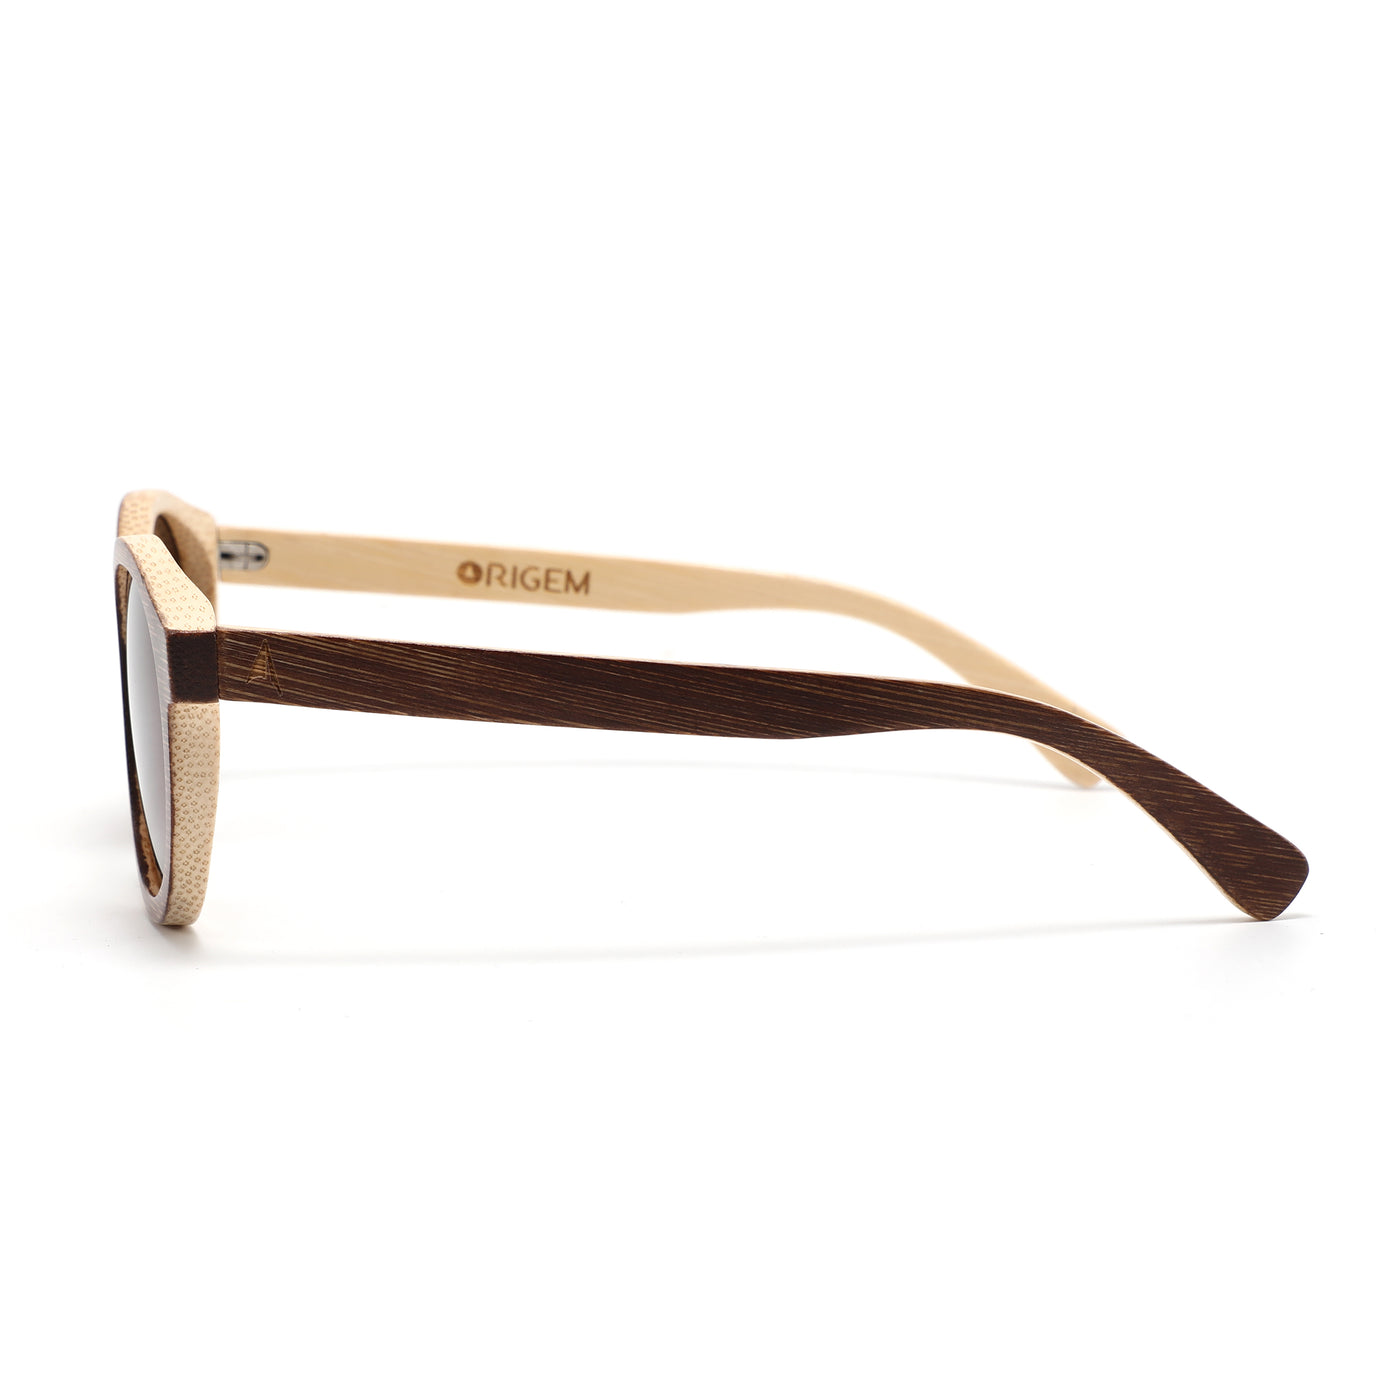 Peneda-Geres - bi-color bamboo with polarized brown lenses - side